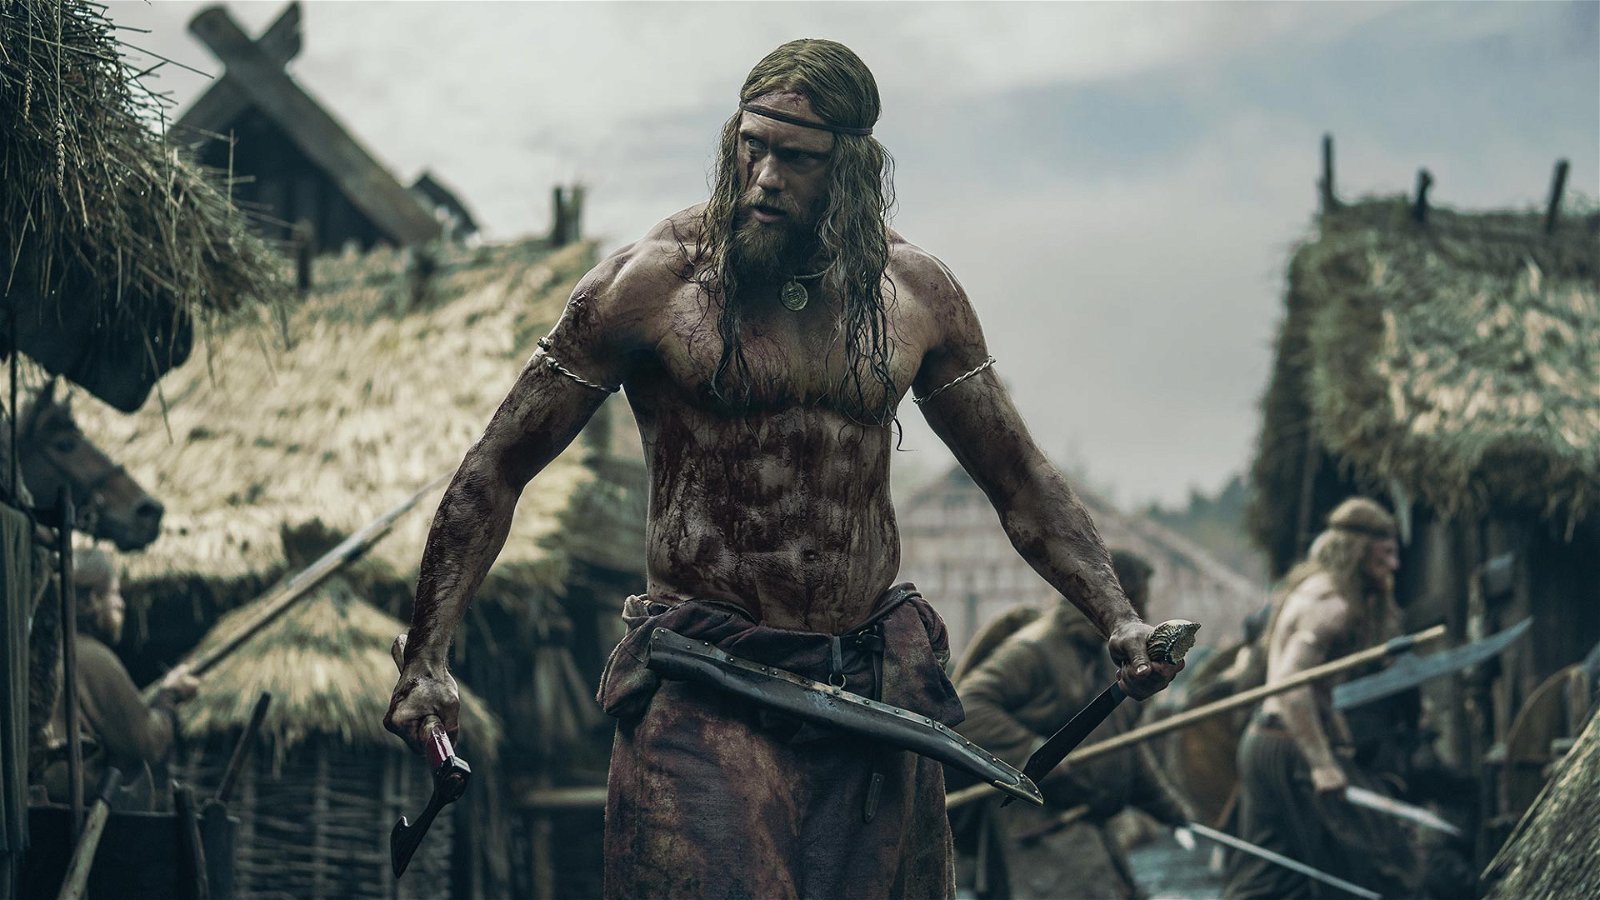 Alexander Skarsgård is an Angry Ripped Viking in The Northman Trailer 1